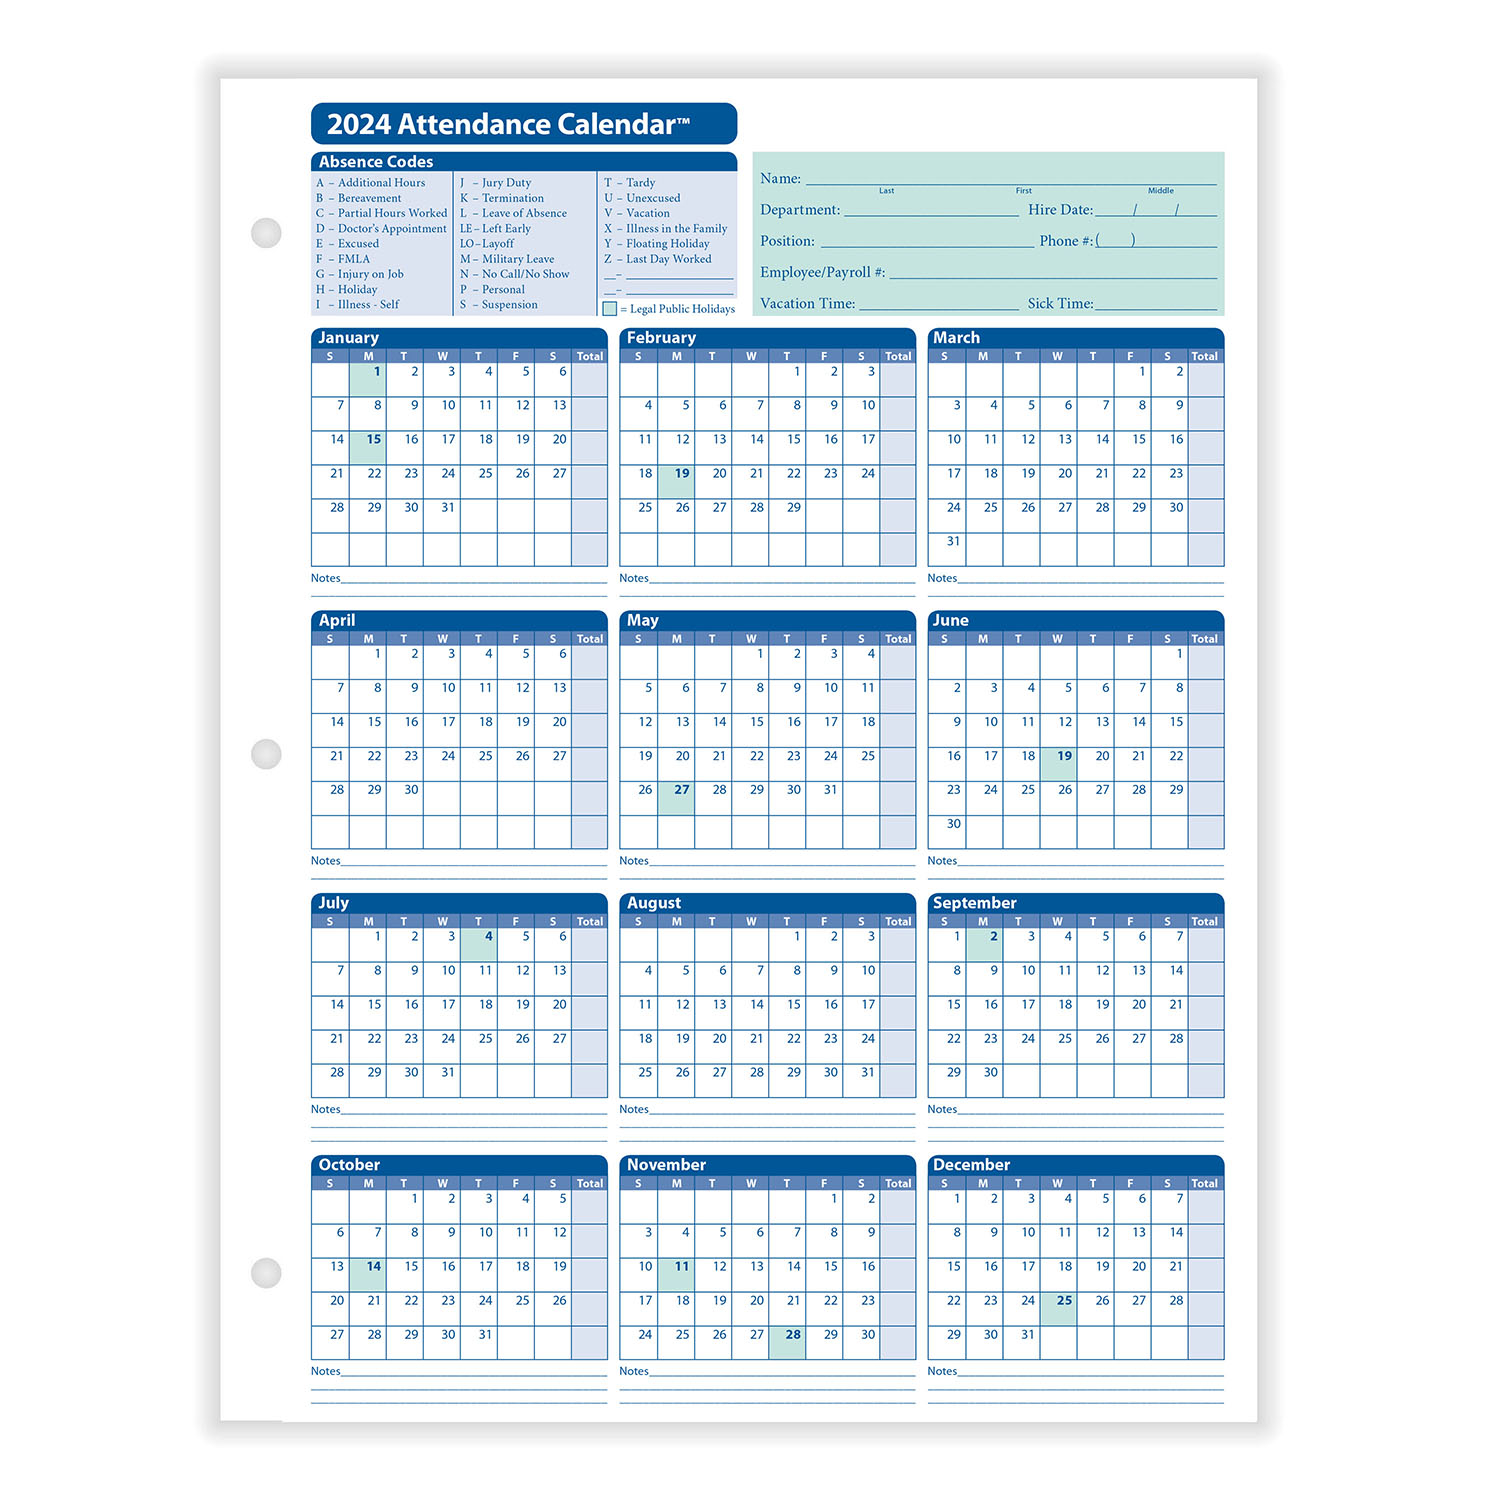 2024 Yearly Employee Attendance Calendar | Yearly Calendar | Hrdirect with regard to Attendance Calendar 2024 Printable